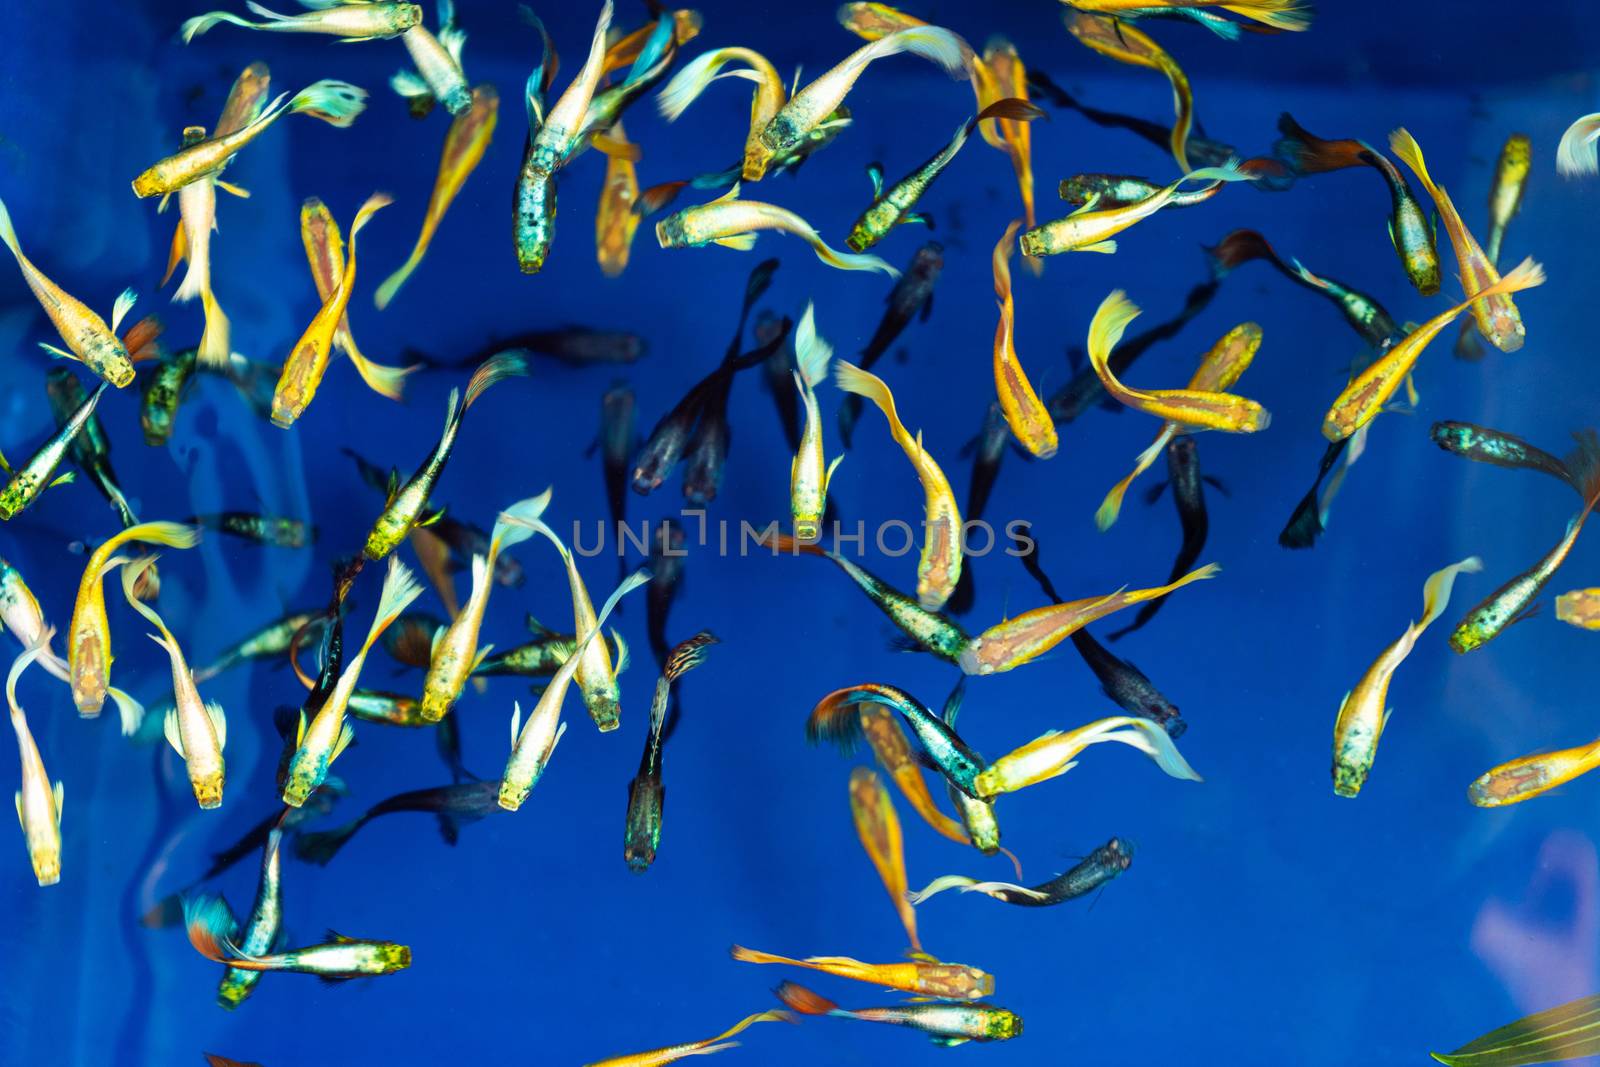 Colored tropical fish in a decorative pond. Orange decorative fish on a blue background. Flock of ornamental fish by Try_my_best